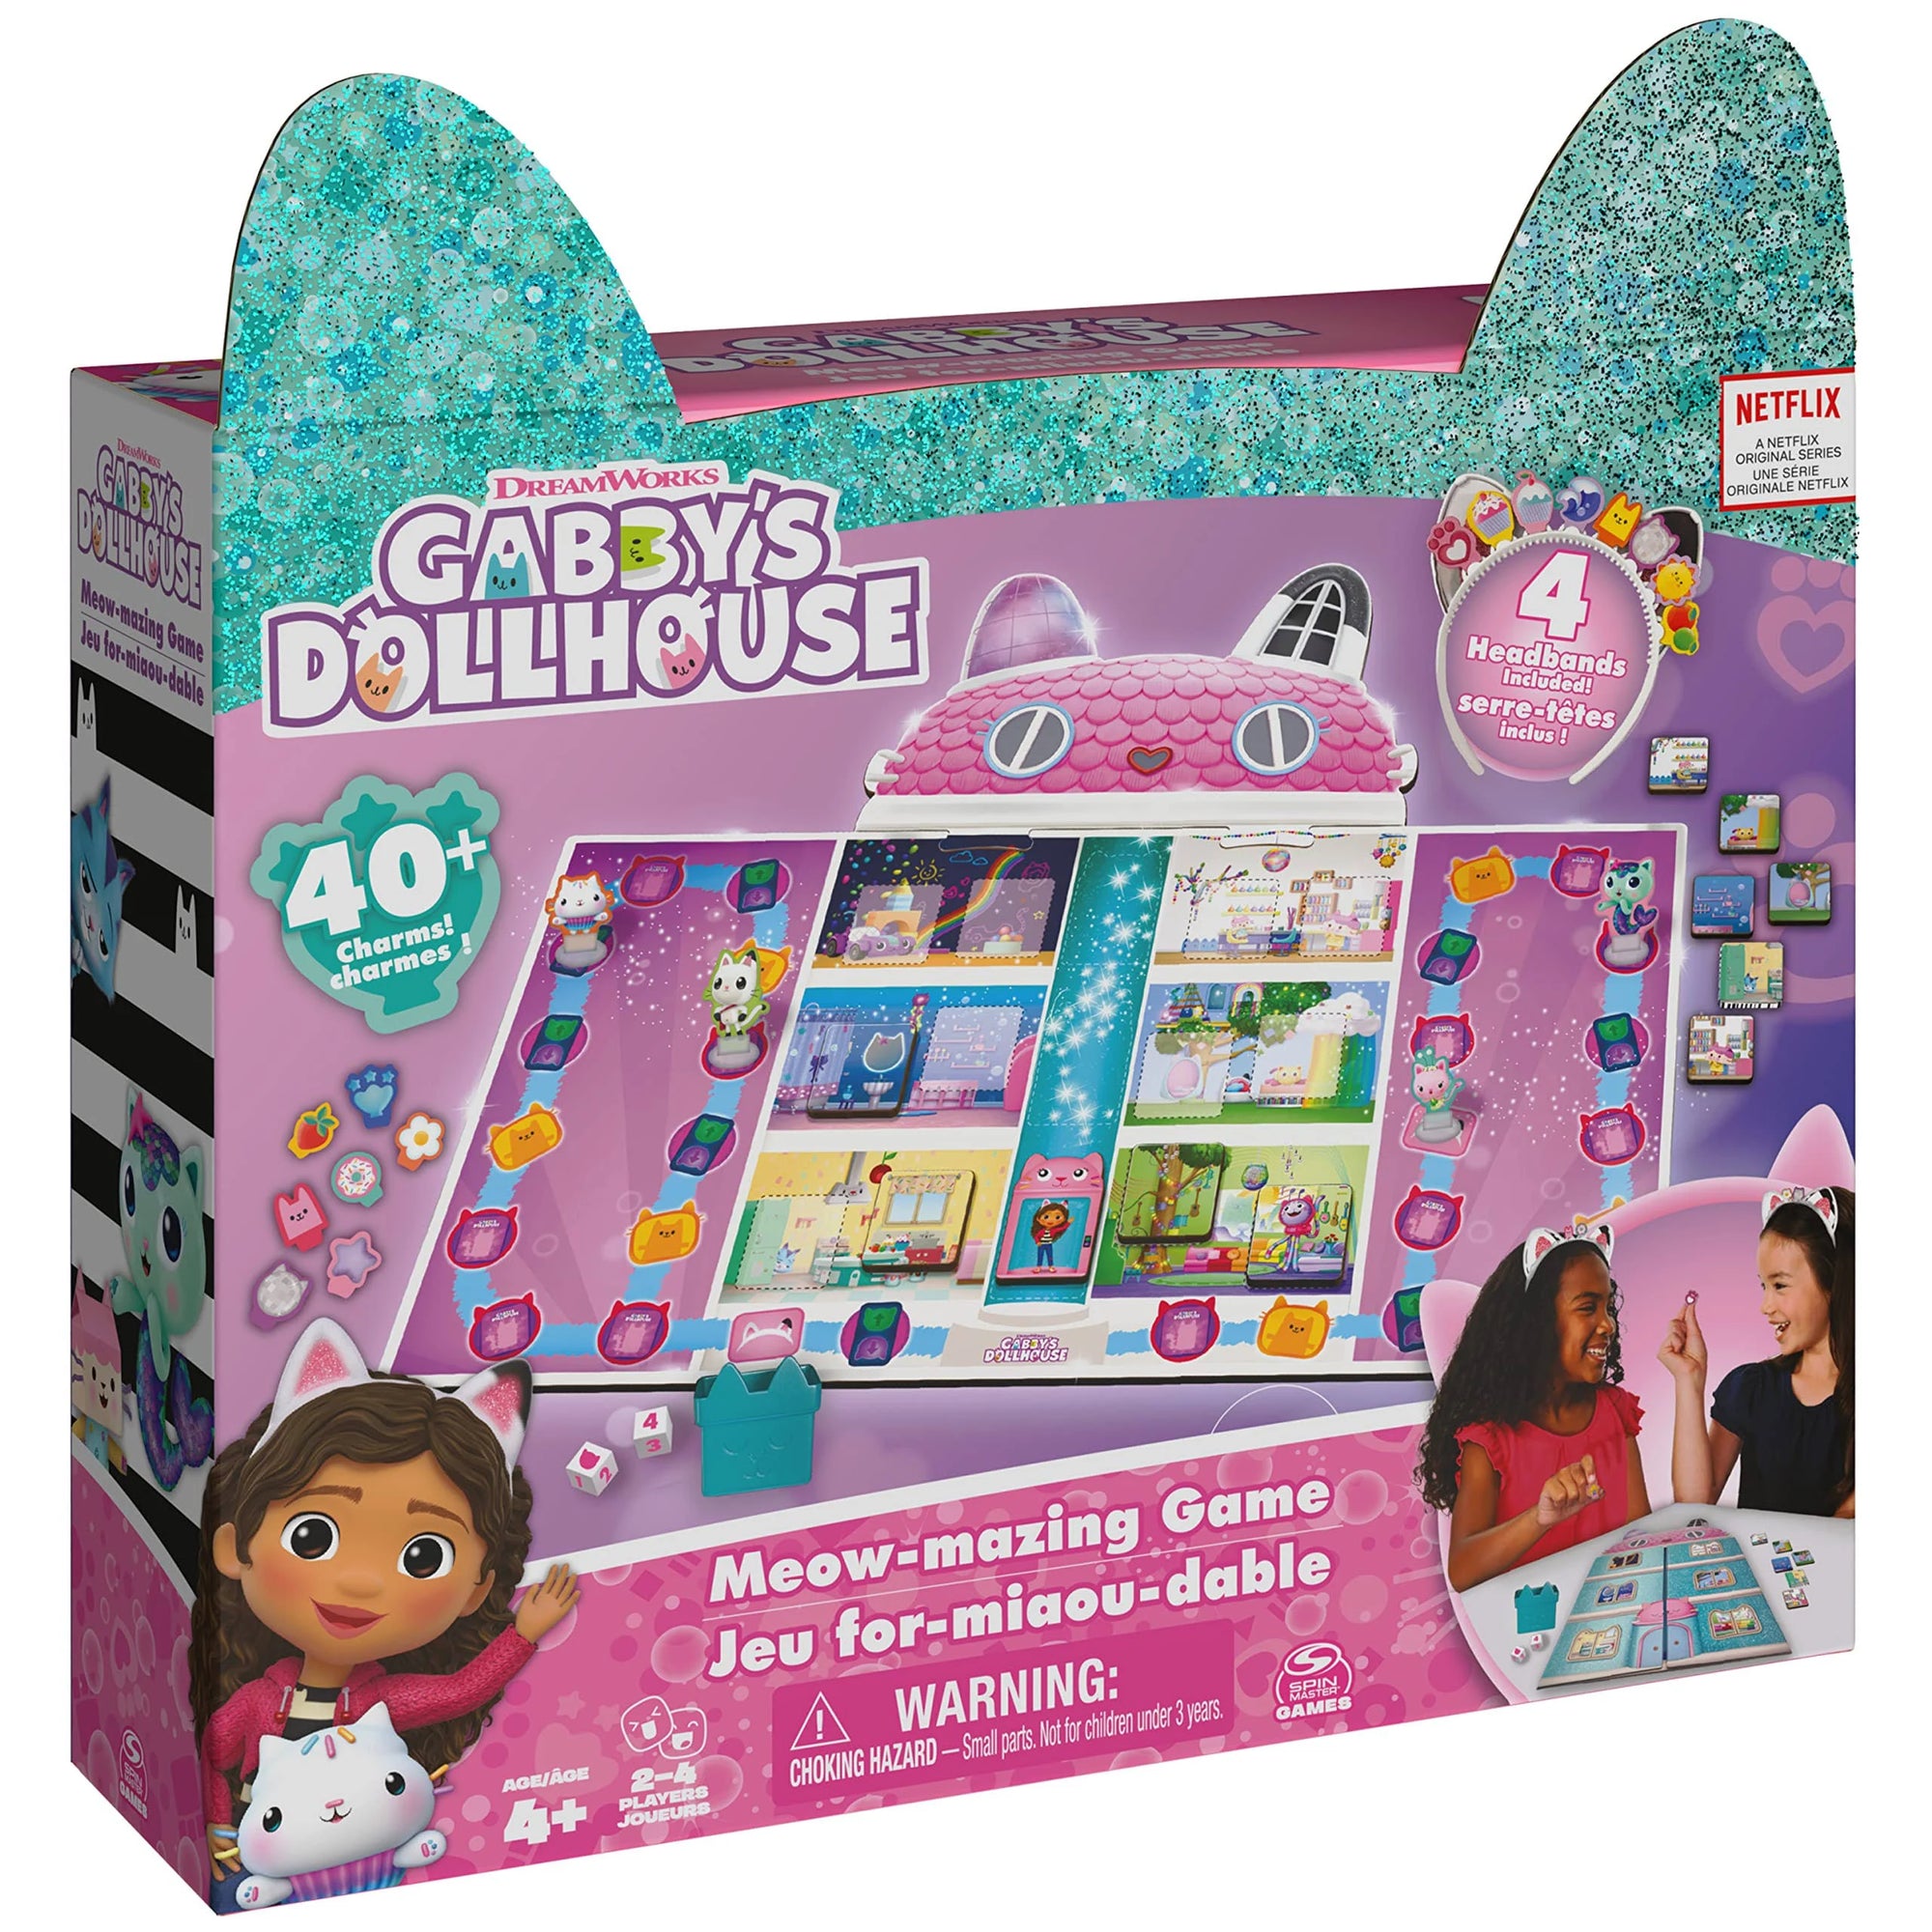 Gabby's Dollhouse Meowmazing Game